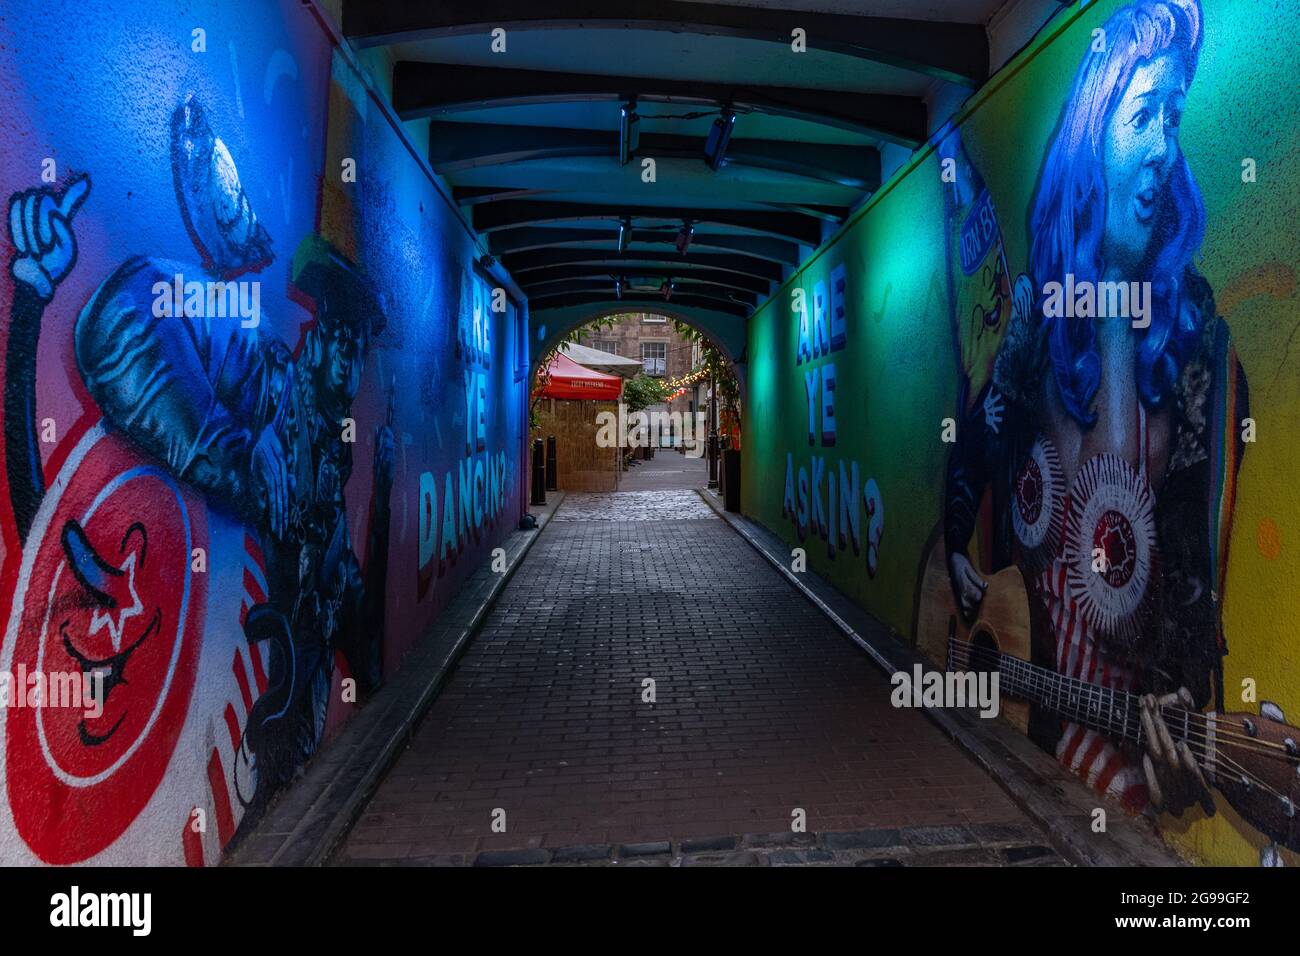 Tunnel entrance to Sloans's Market from Argyle Street in Glasgow city centre, Scotland, Uk Stock Photo